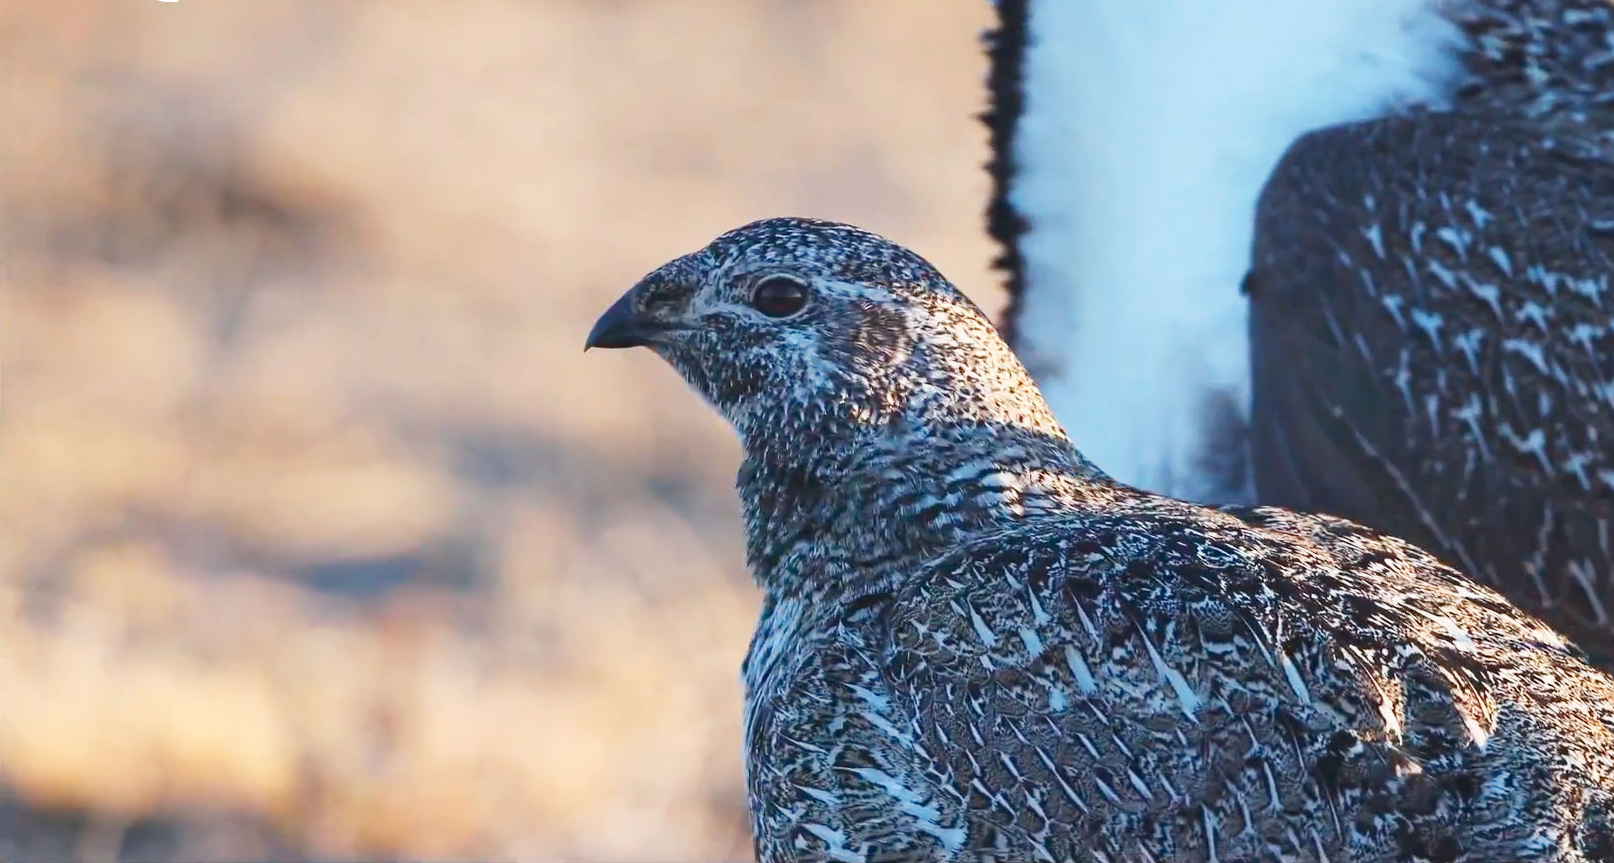 Female Greater Sage-Grouse